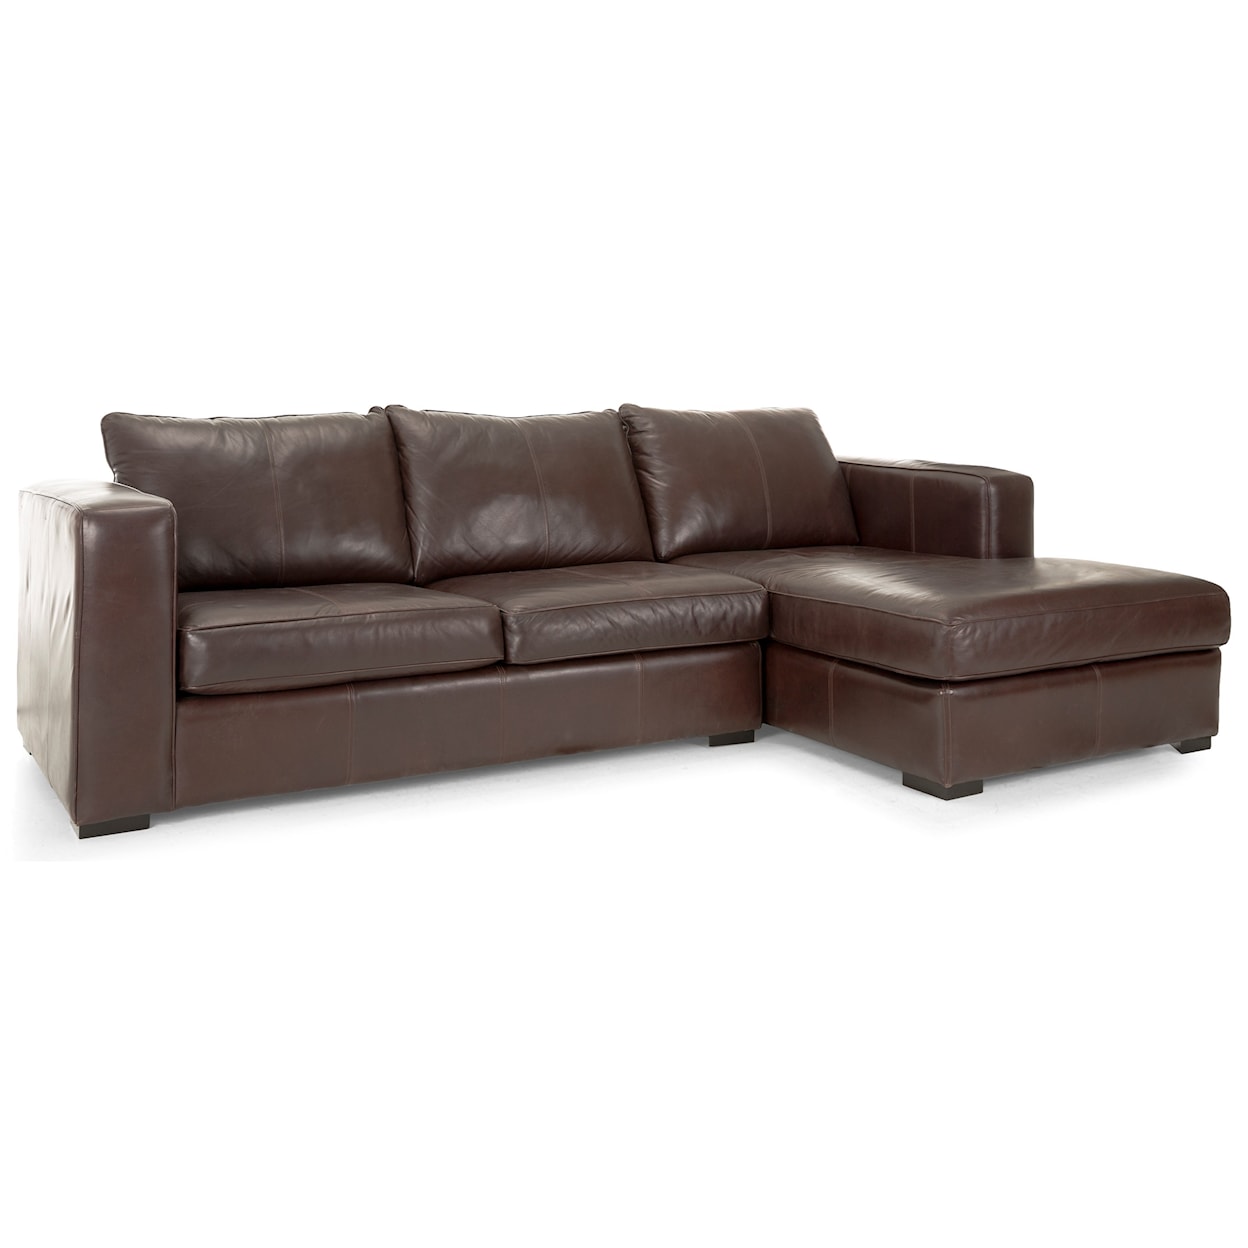 Decor-Rest 2900 Sofa with Chaise